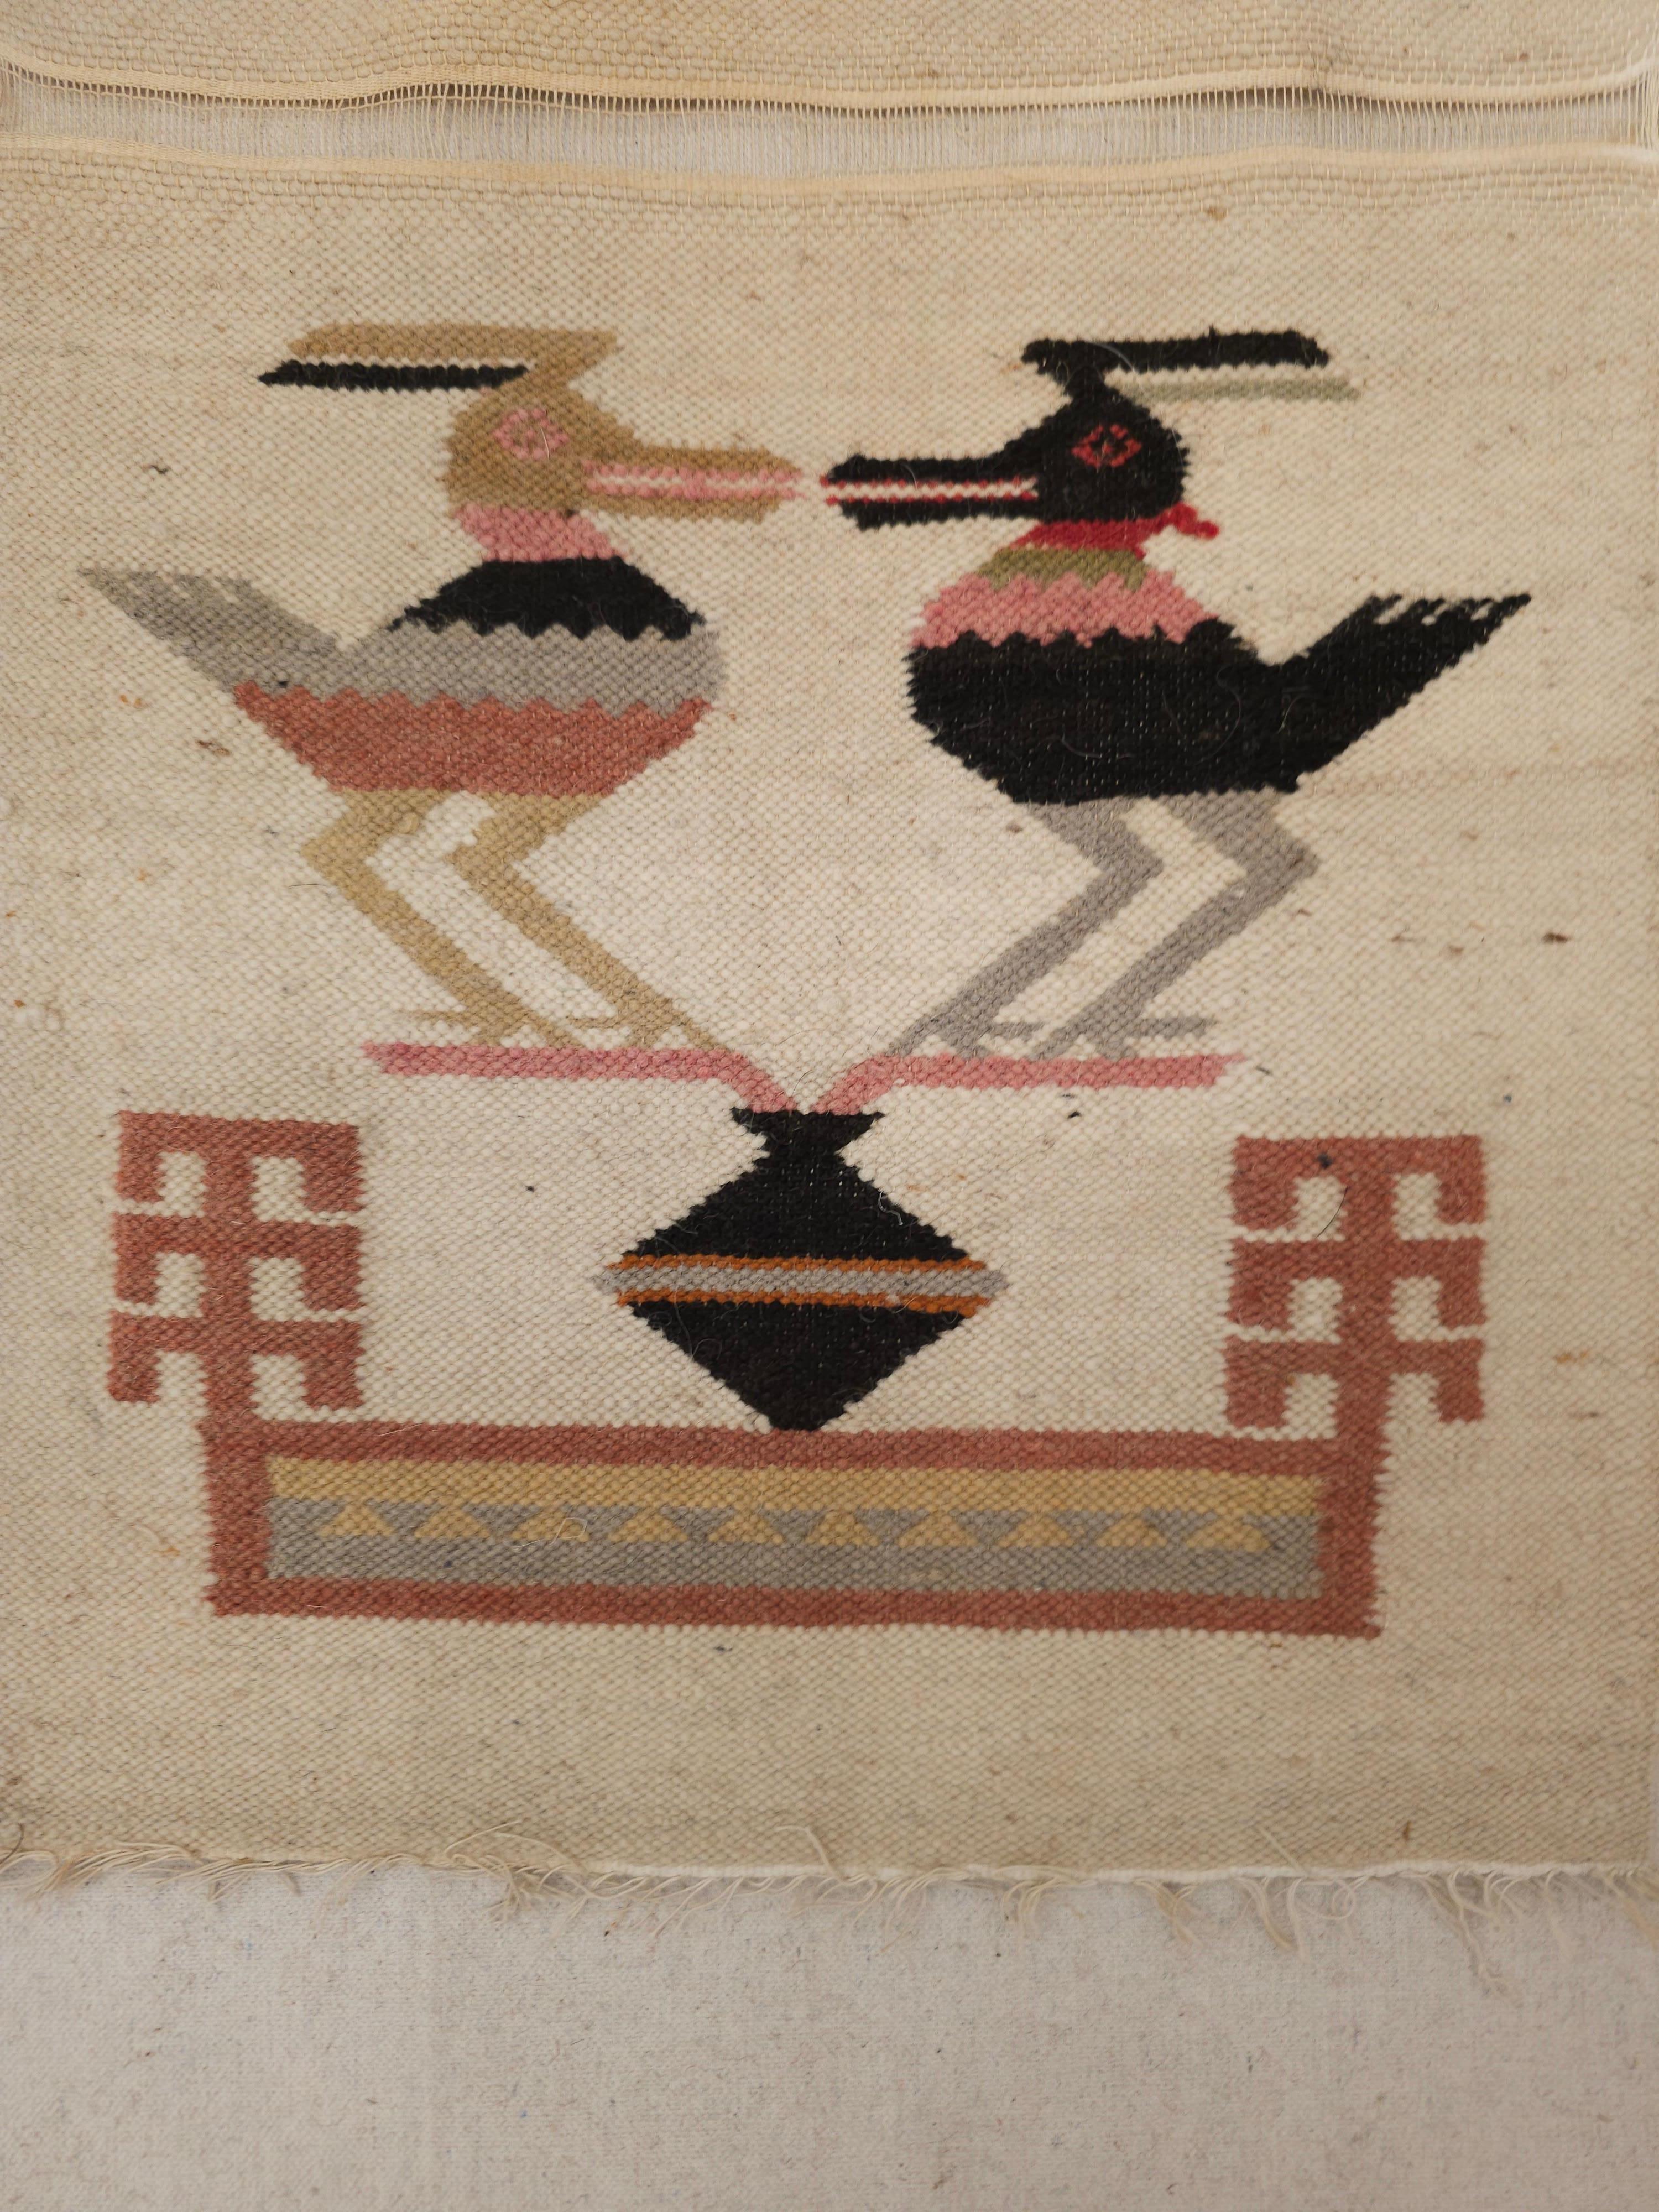 Vintage American Navajo Pictorial Rug with Mythical Birds Design Wall Art In Good Condition For Sale In Barrington, IL